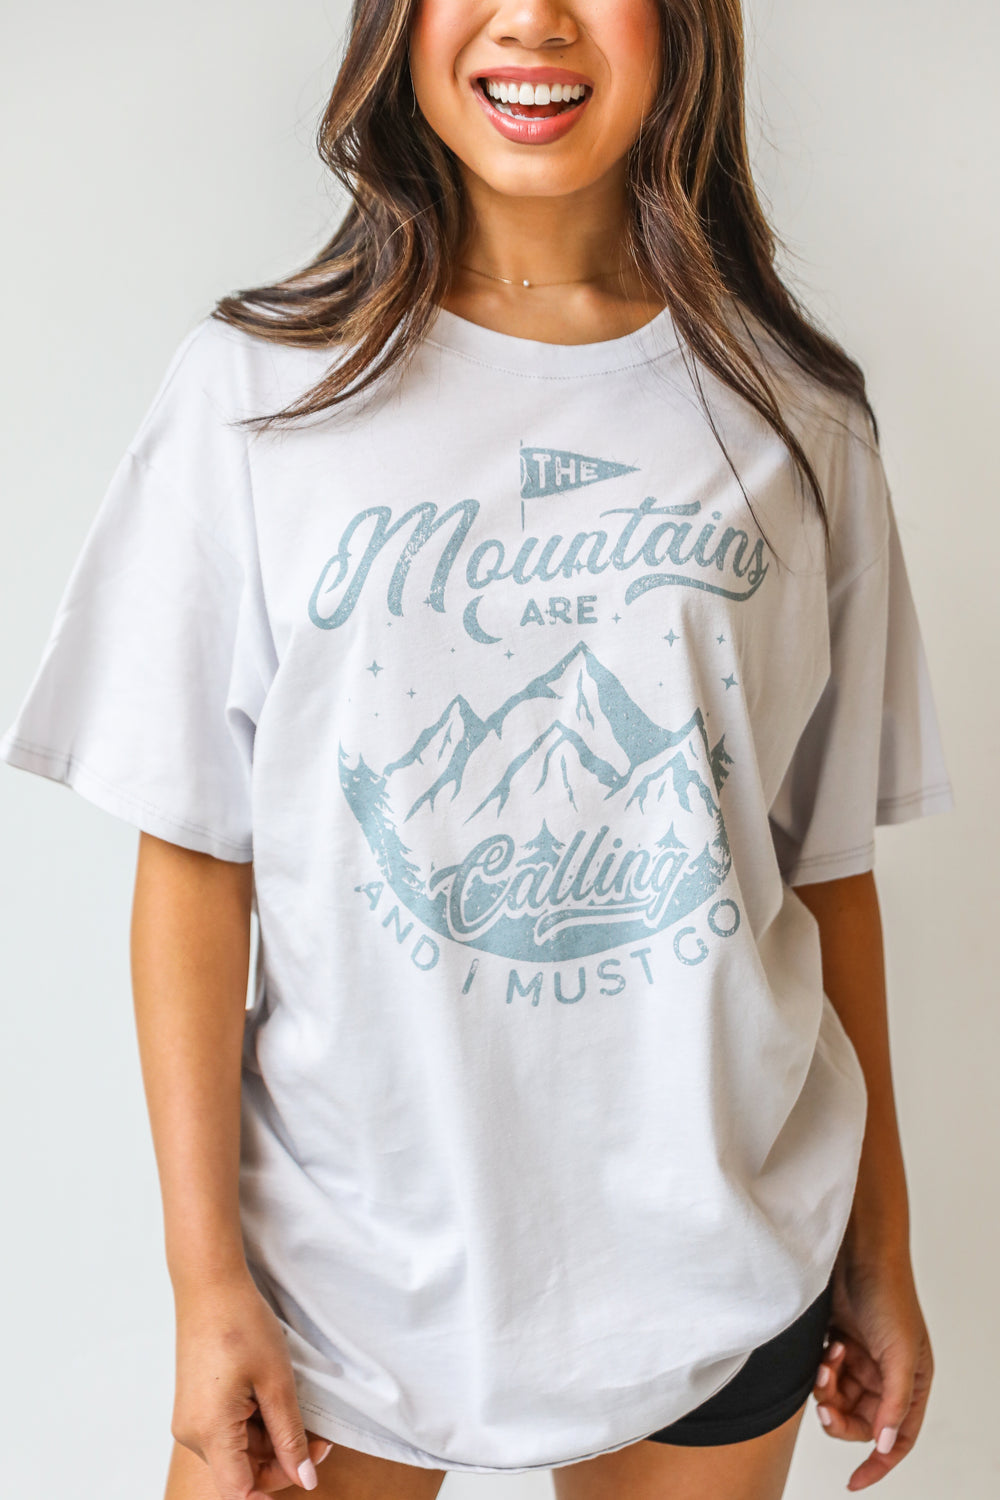 The Mountains Are Calling And I Must Go Graphic Tee close up